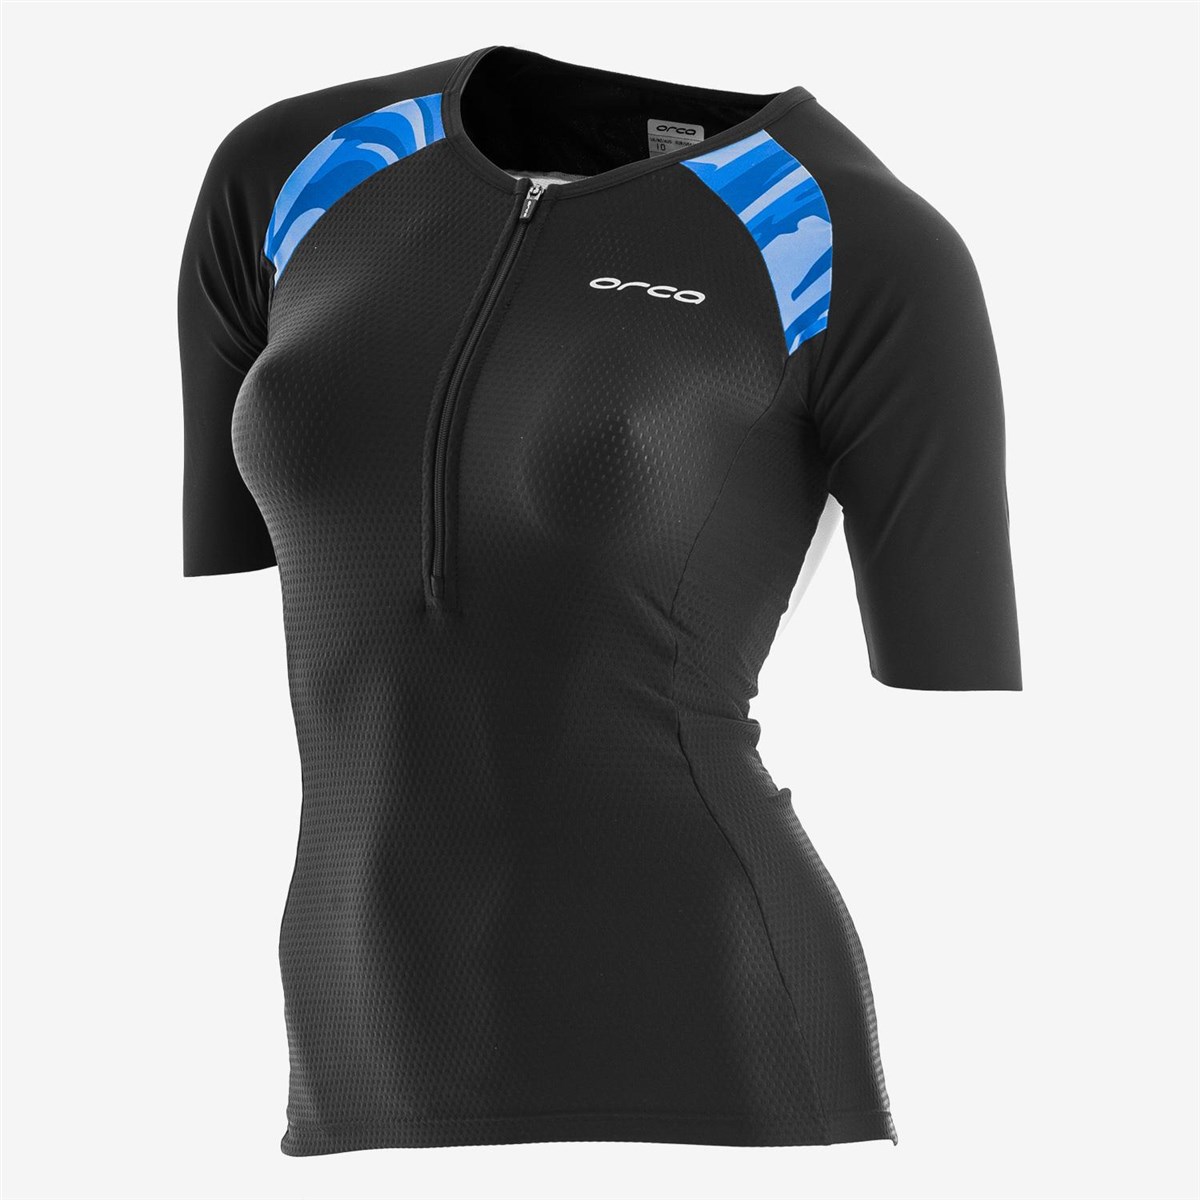 Orca Womens 226 Jersey product image